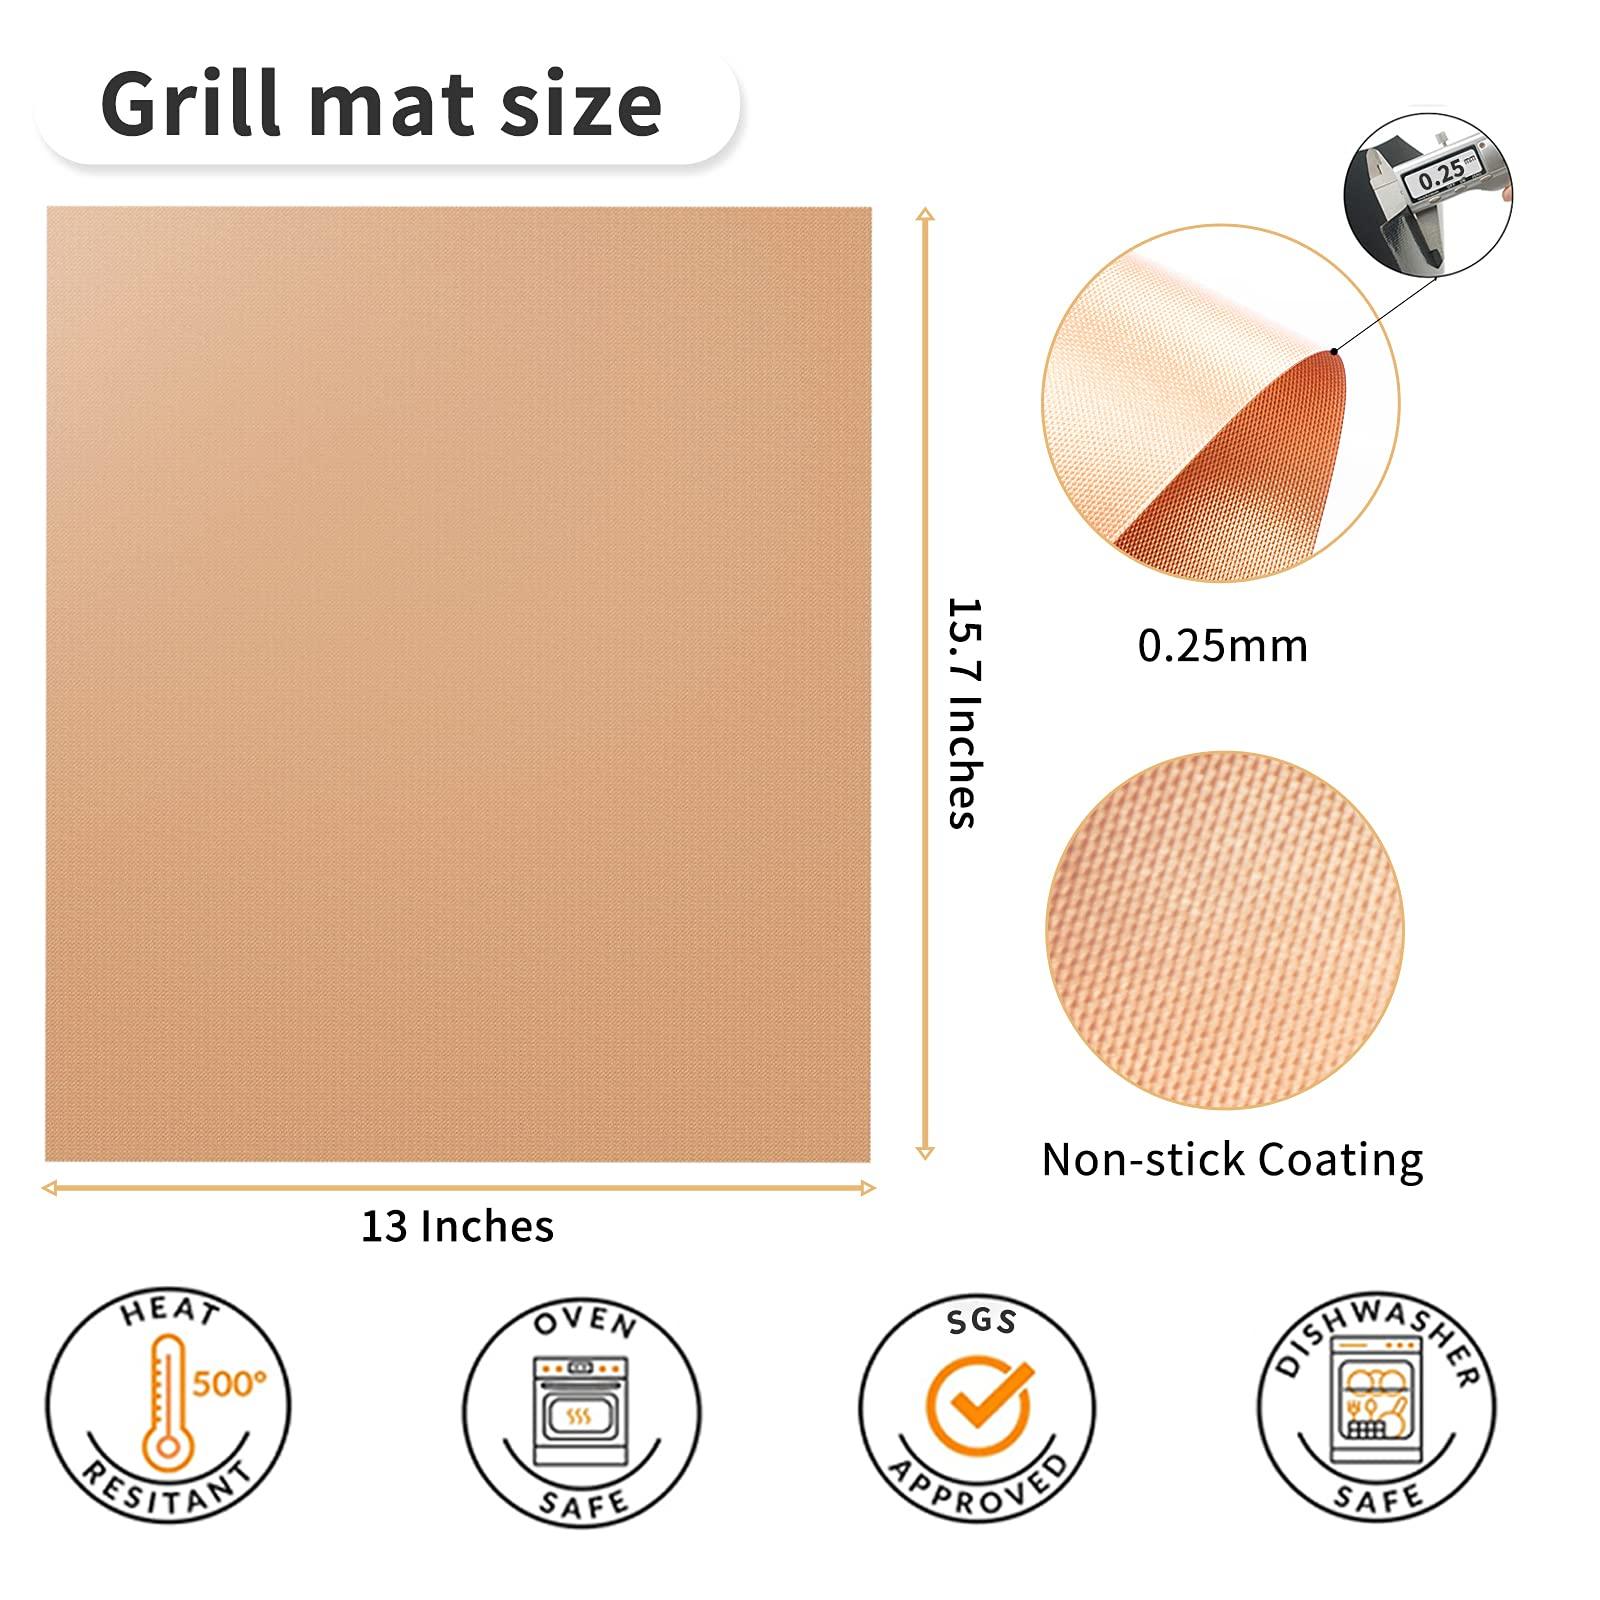 YRYM HT Copper Grill Mats for Outdoor Grill -Set of 5 Nonstick BBQ Grill Mat 15.75 x 13", Reusable & Heavy Duty Under Grill Mat, Easy to Clean, Works for Gas, Charcoal, Electric Grill - CookCave